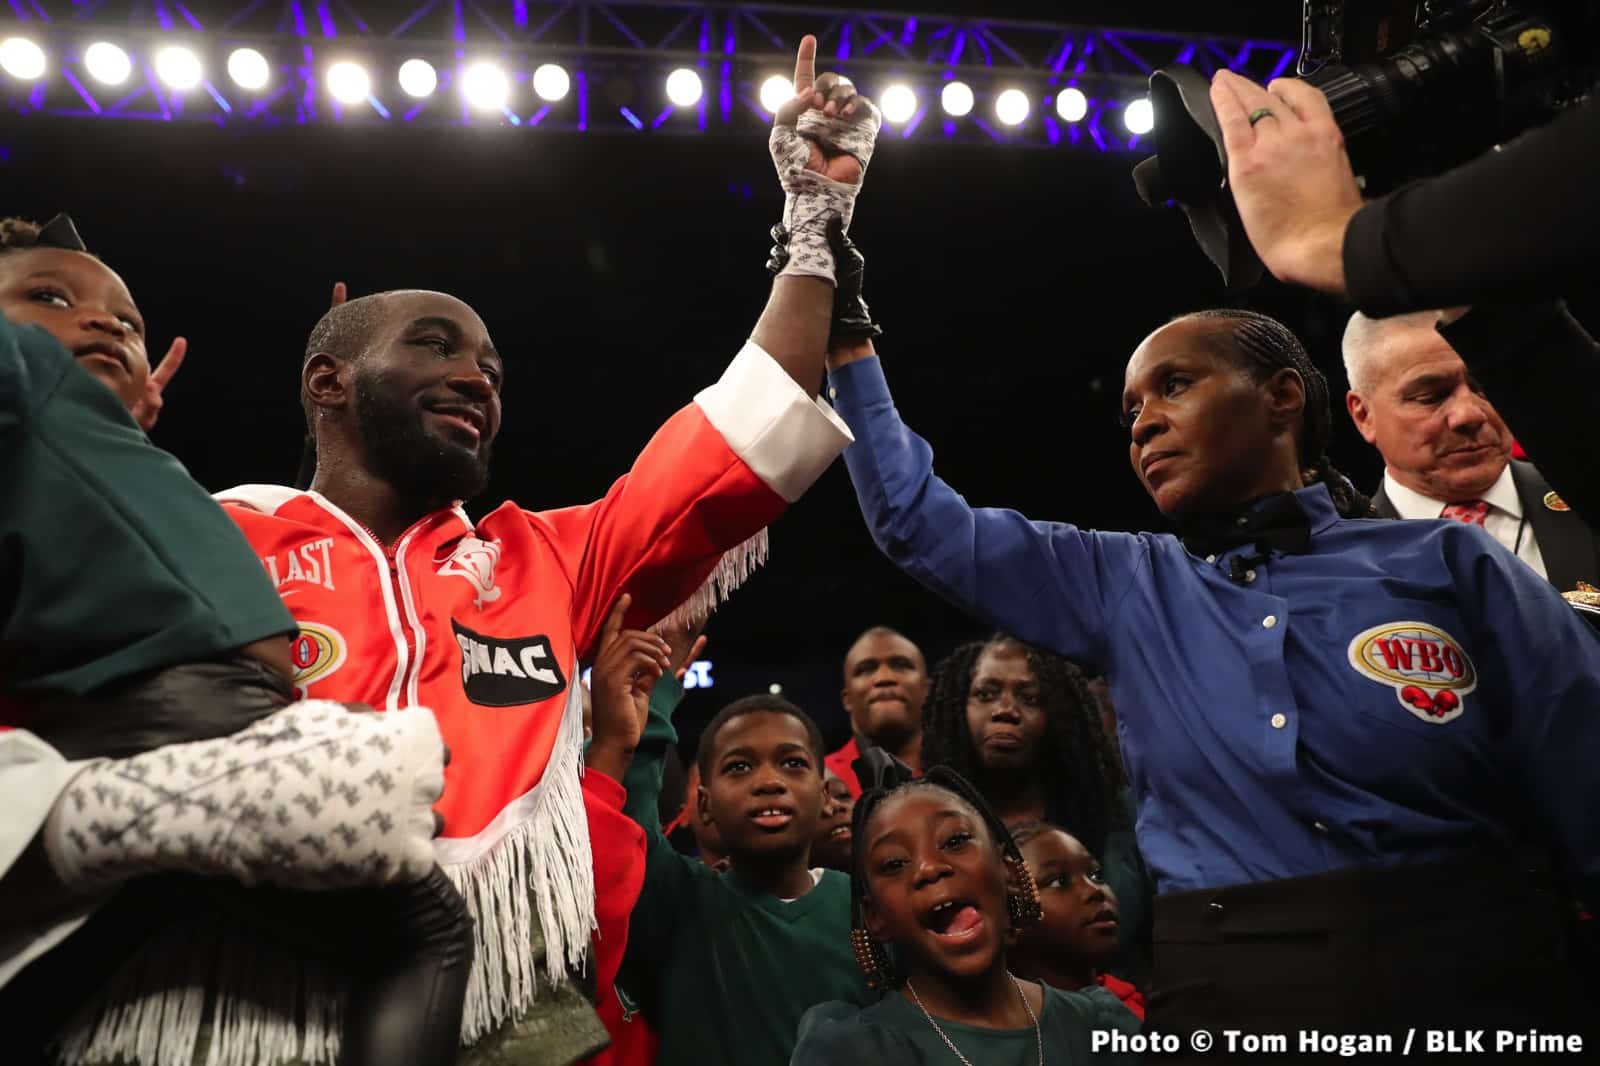 Terence Crawford isn't fighting Jermell Charlo says Errol Spence